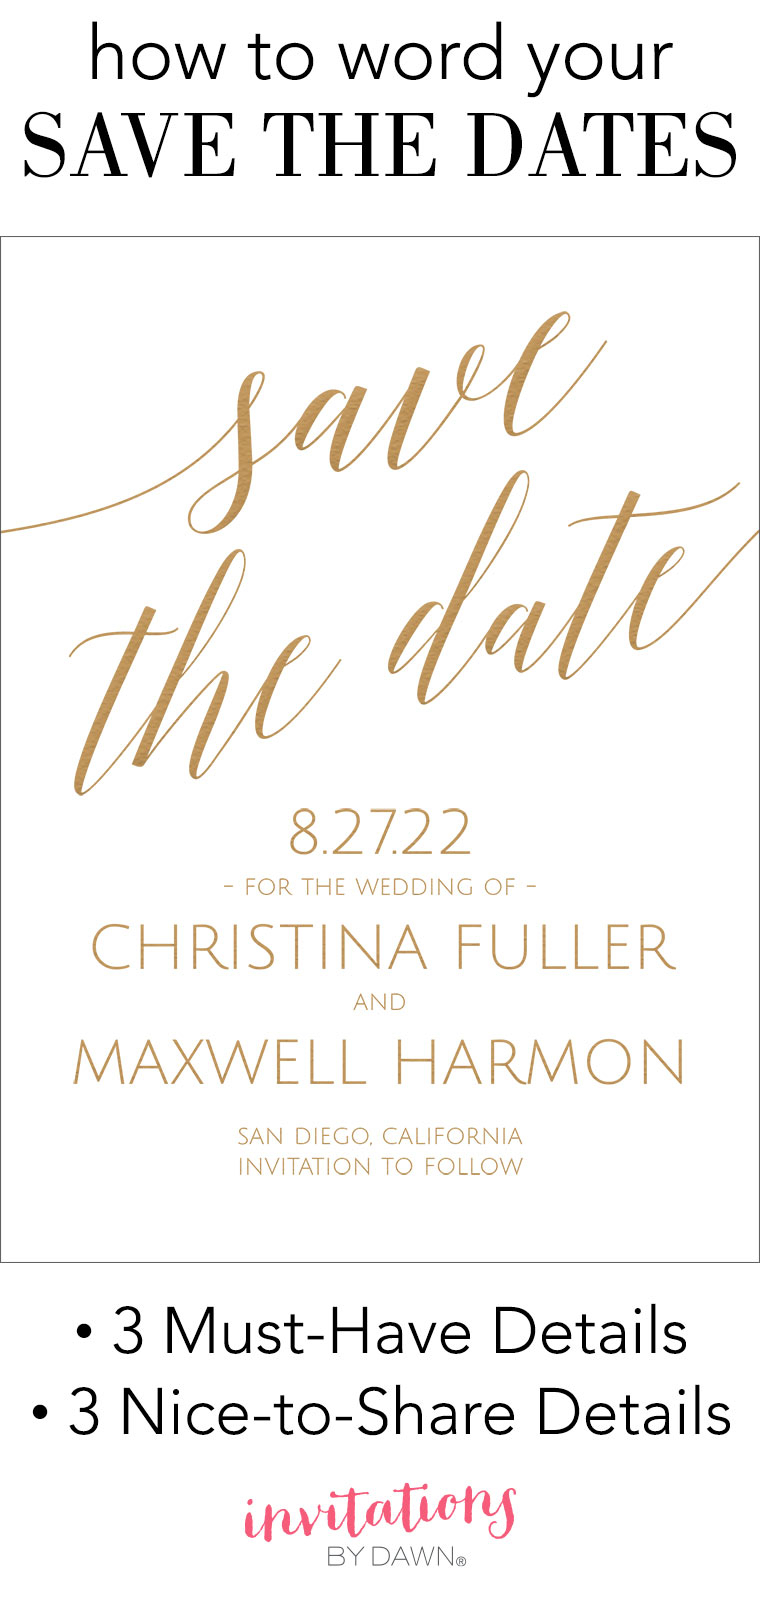 Save The Date Wording | Invitationsdawn With Save The Date Templates Word